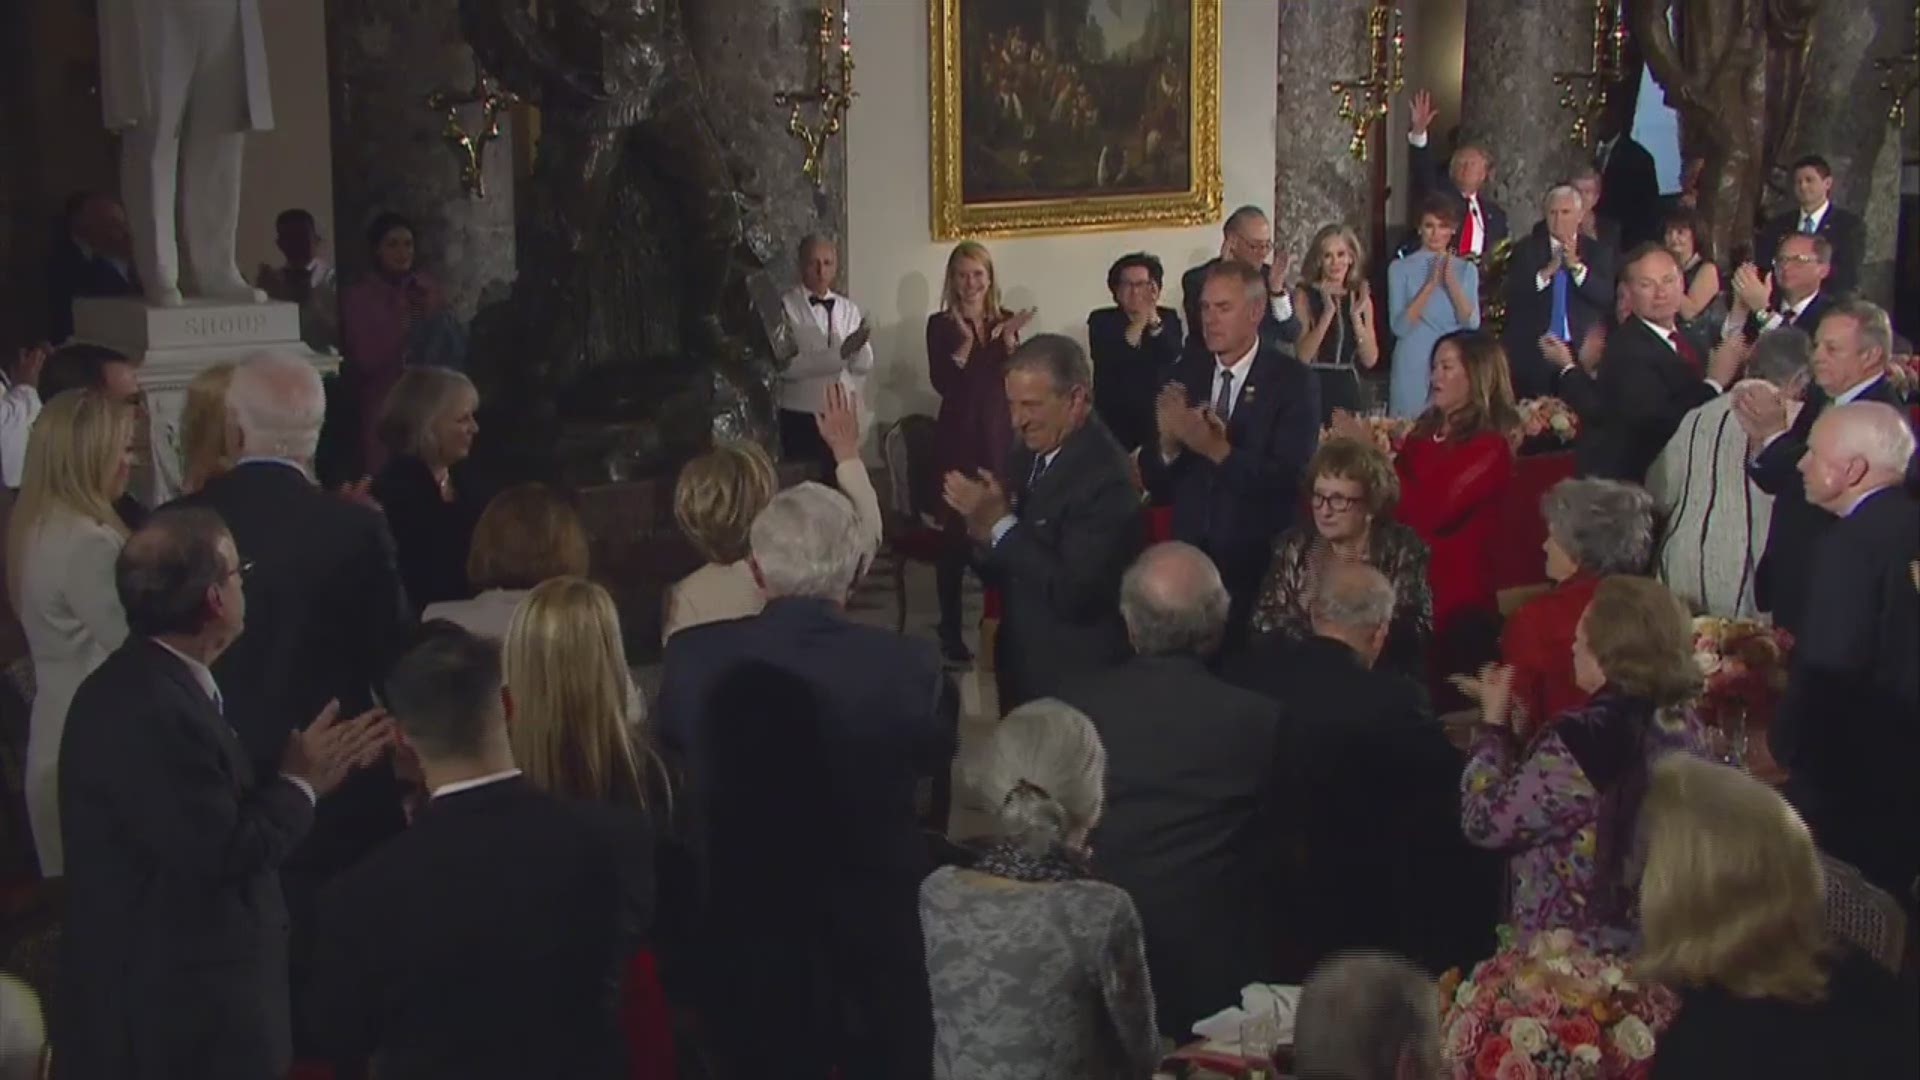 At the end of his inaugural luncheon, President Trump asked the crowd to give Hillary Clinton a standing ovation.